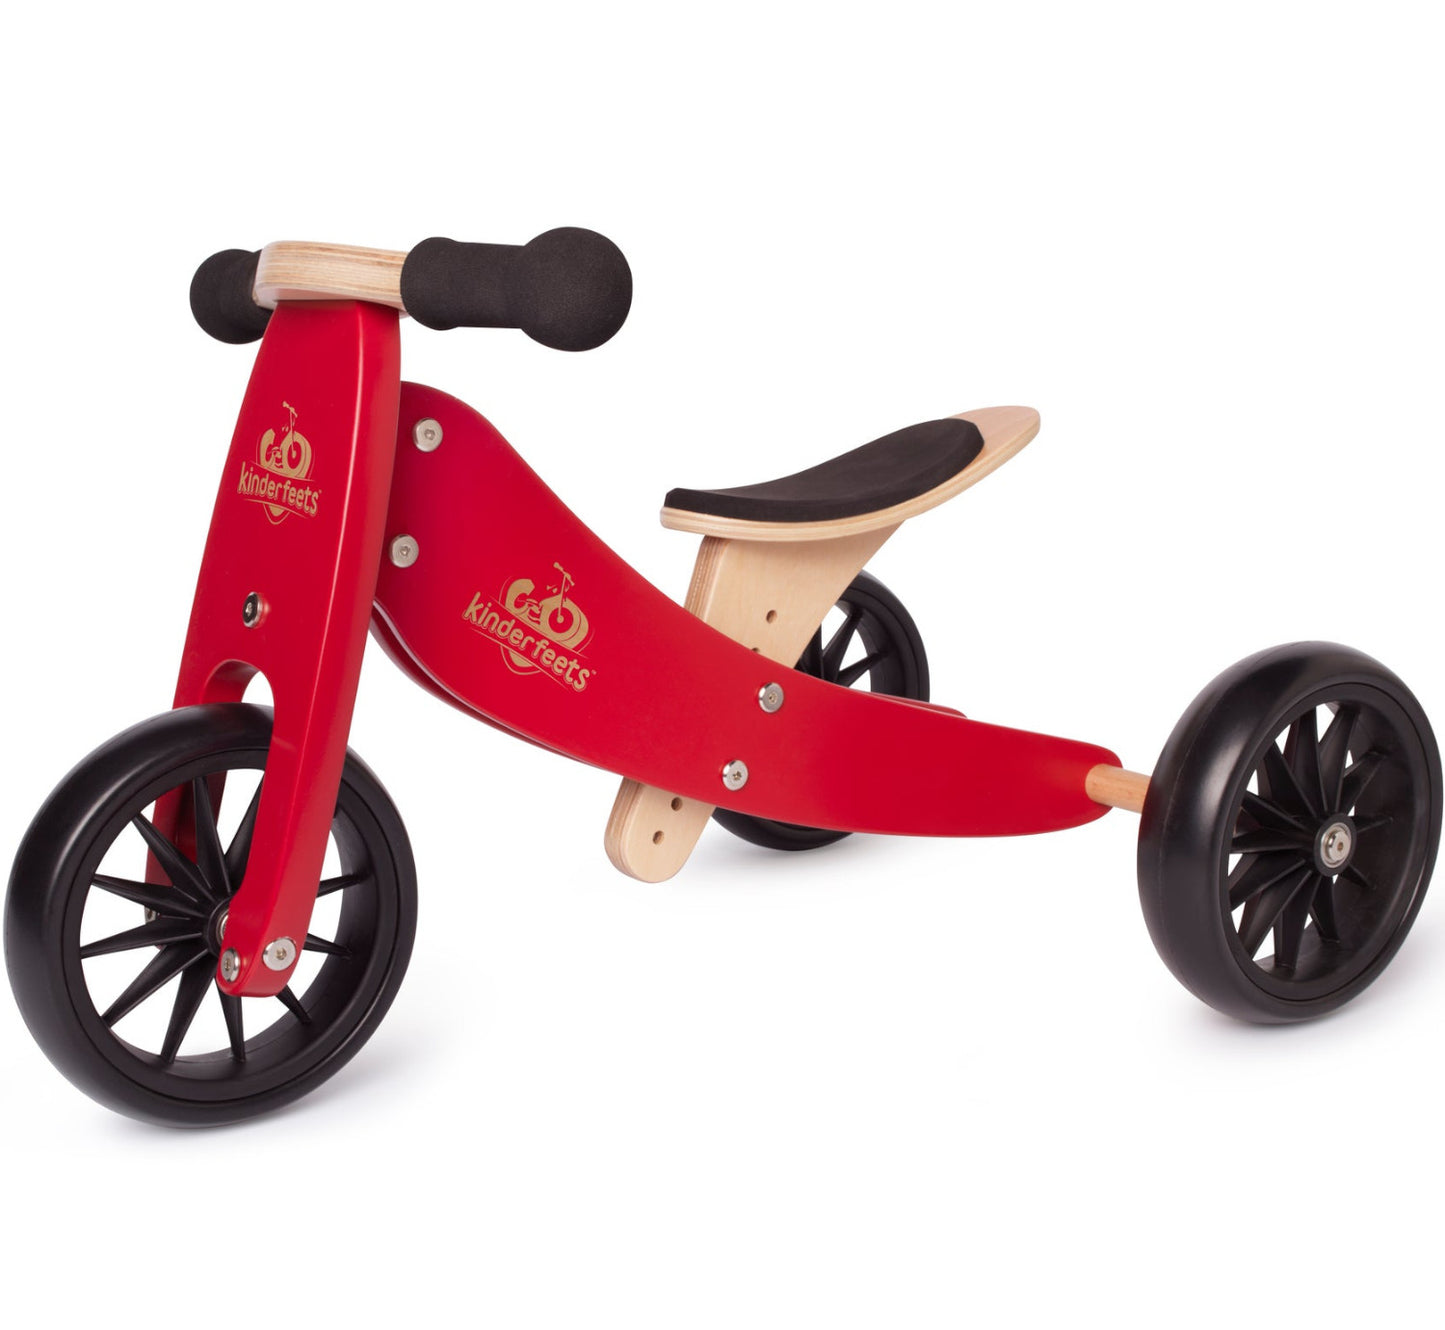 Tiny Tot 2-in-1 Trike - Cherry Red